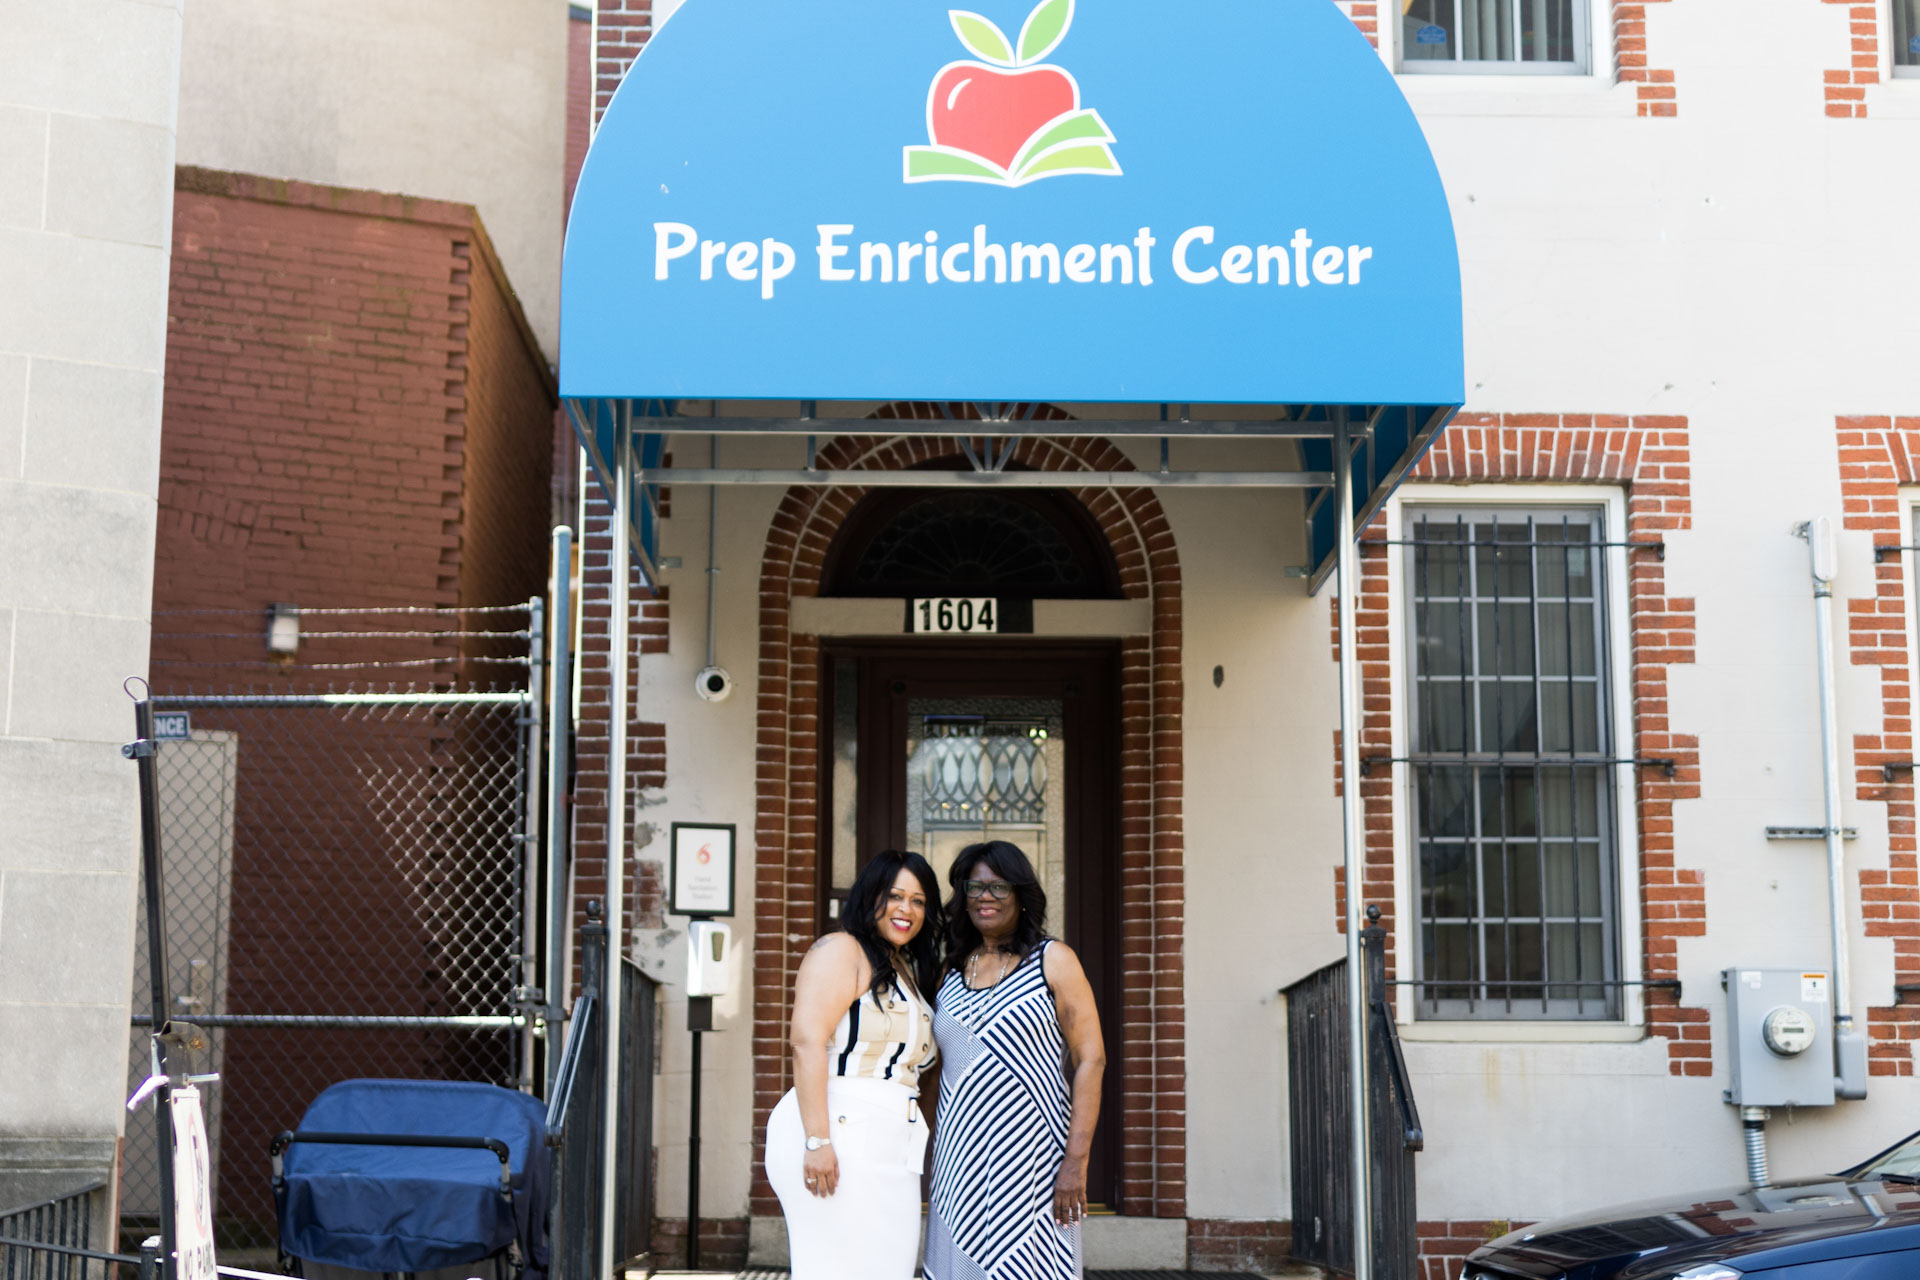 Naimah Simkins, standing in front of Prep Enrichment Center with her mother